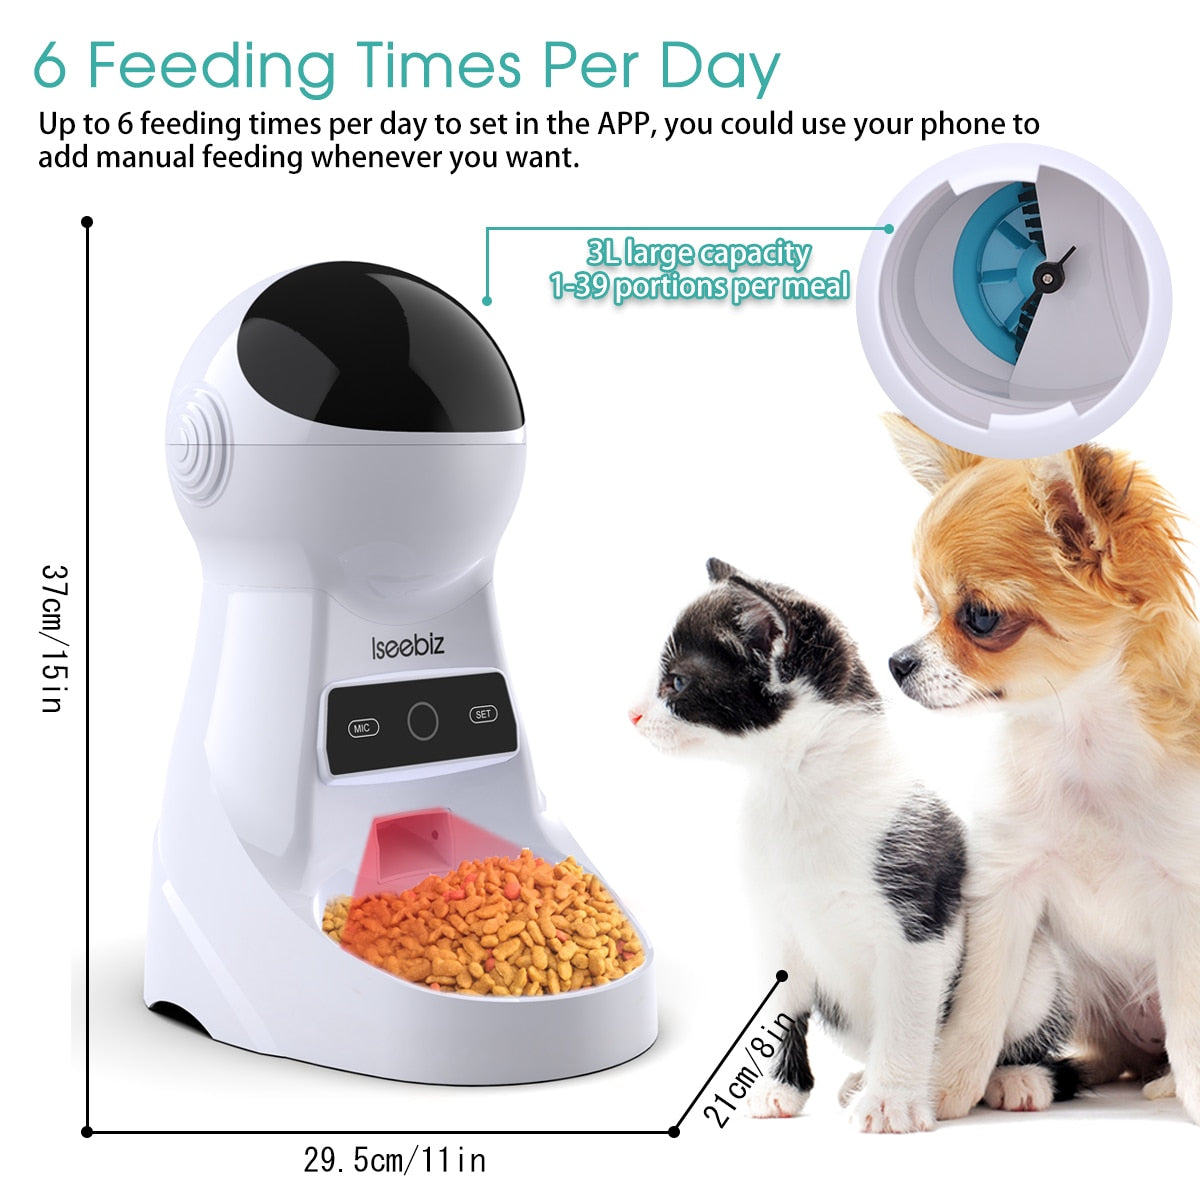 Automatic Pet Feeder With Voice Record - Pets R Kings